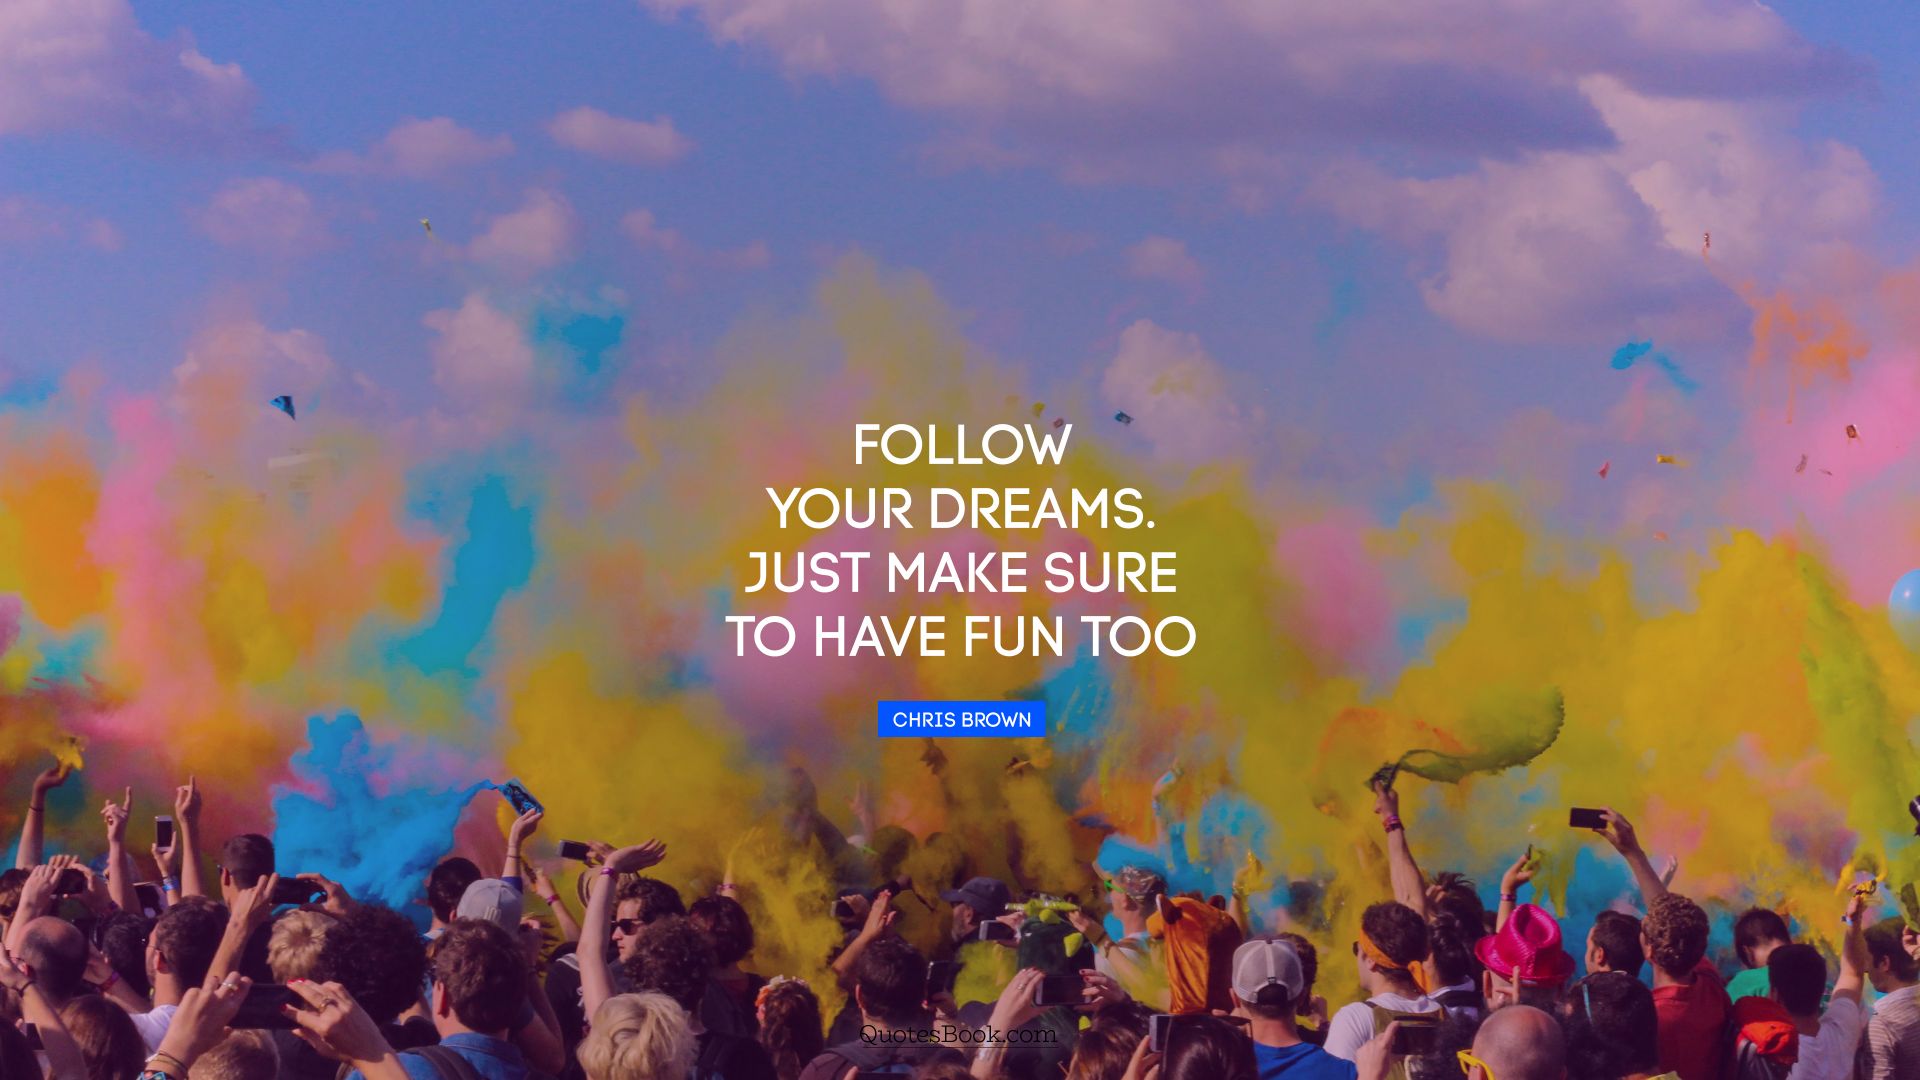 Follow your dreams. Just make sure to have fun too. - Quote by Chris Brown